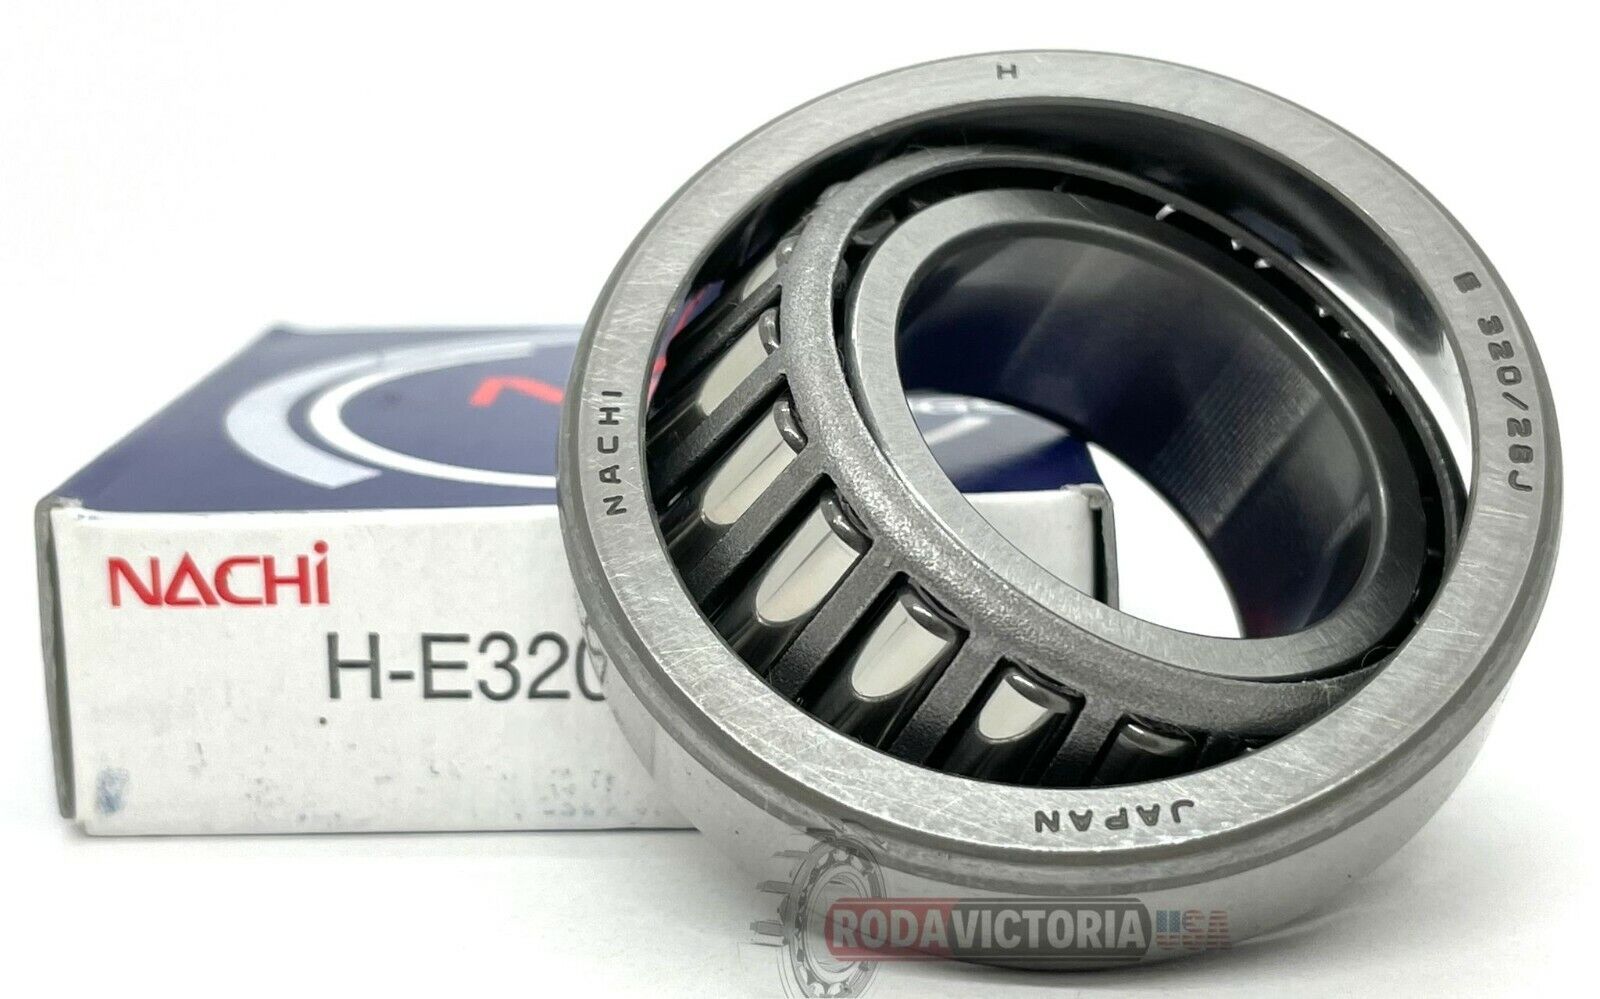 NACHI MADE IN JAPAN 320/28 JR, Tapered roller bearing, 28x52x16 mm  YL847065AA